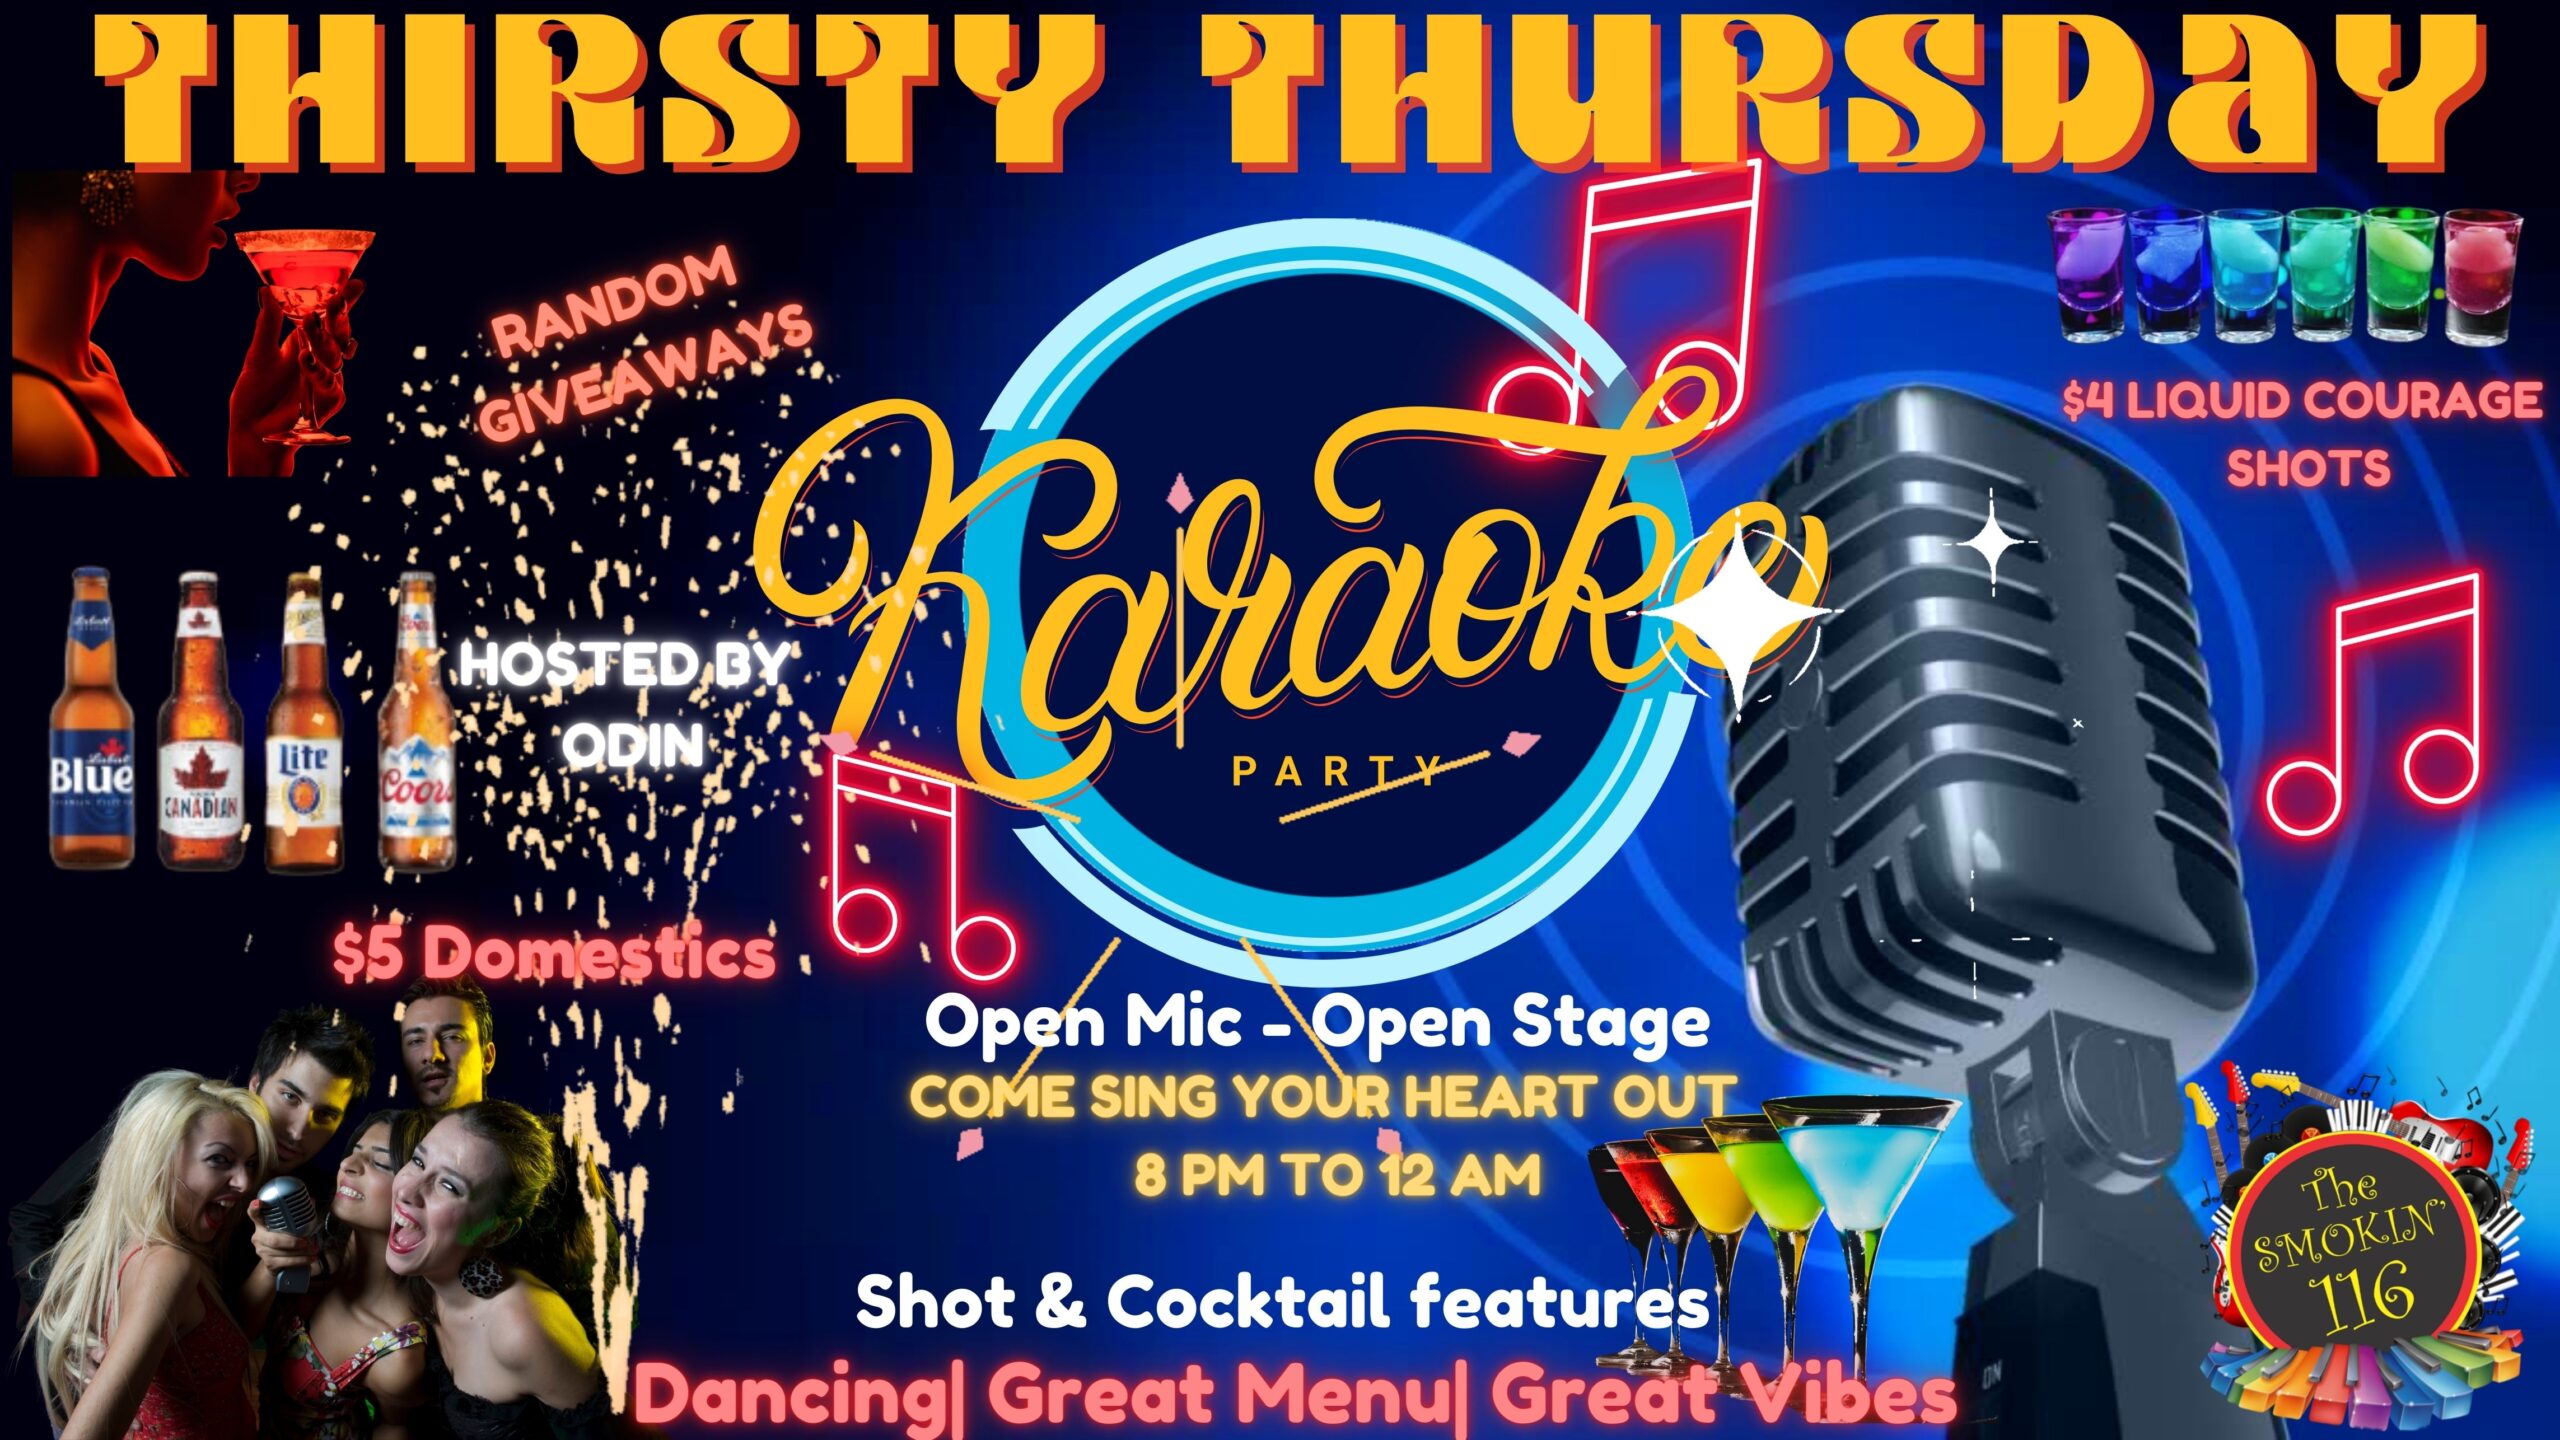 Poster titled "Thirsty Thursday Karaoke" with bar releated imagery and a large microphone.